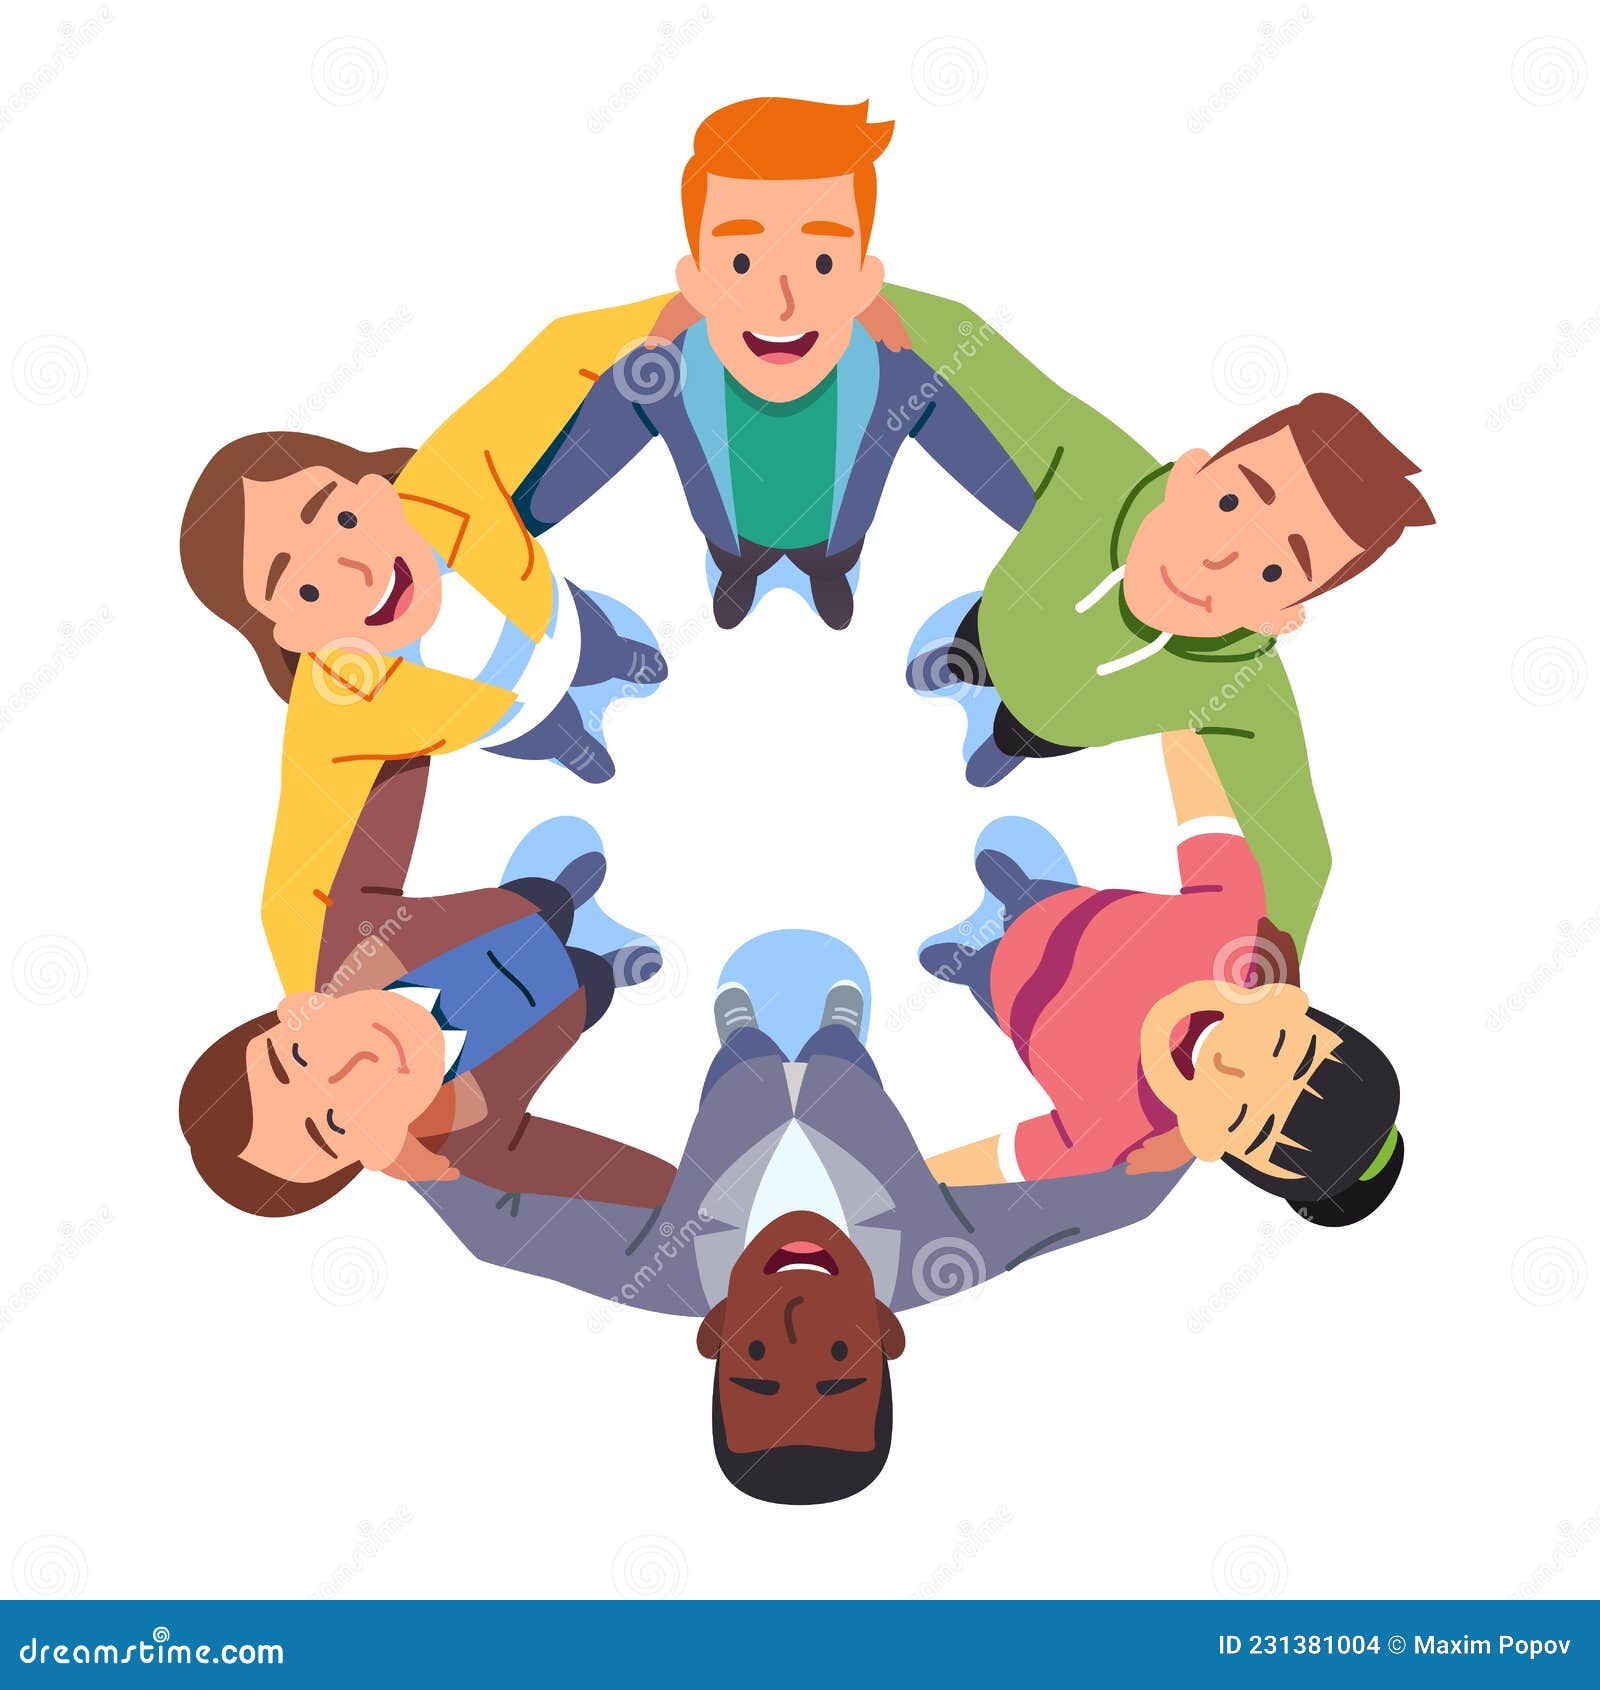 Team huddle top view stock vector. Illustration of student - 231381004